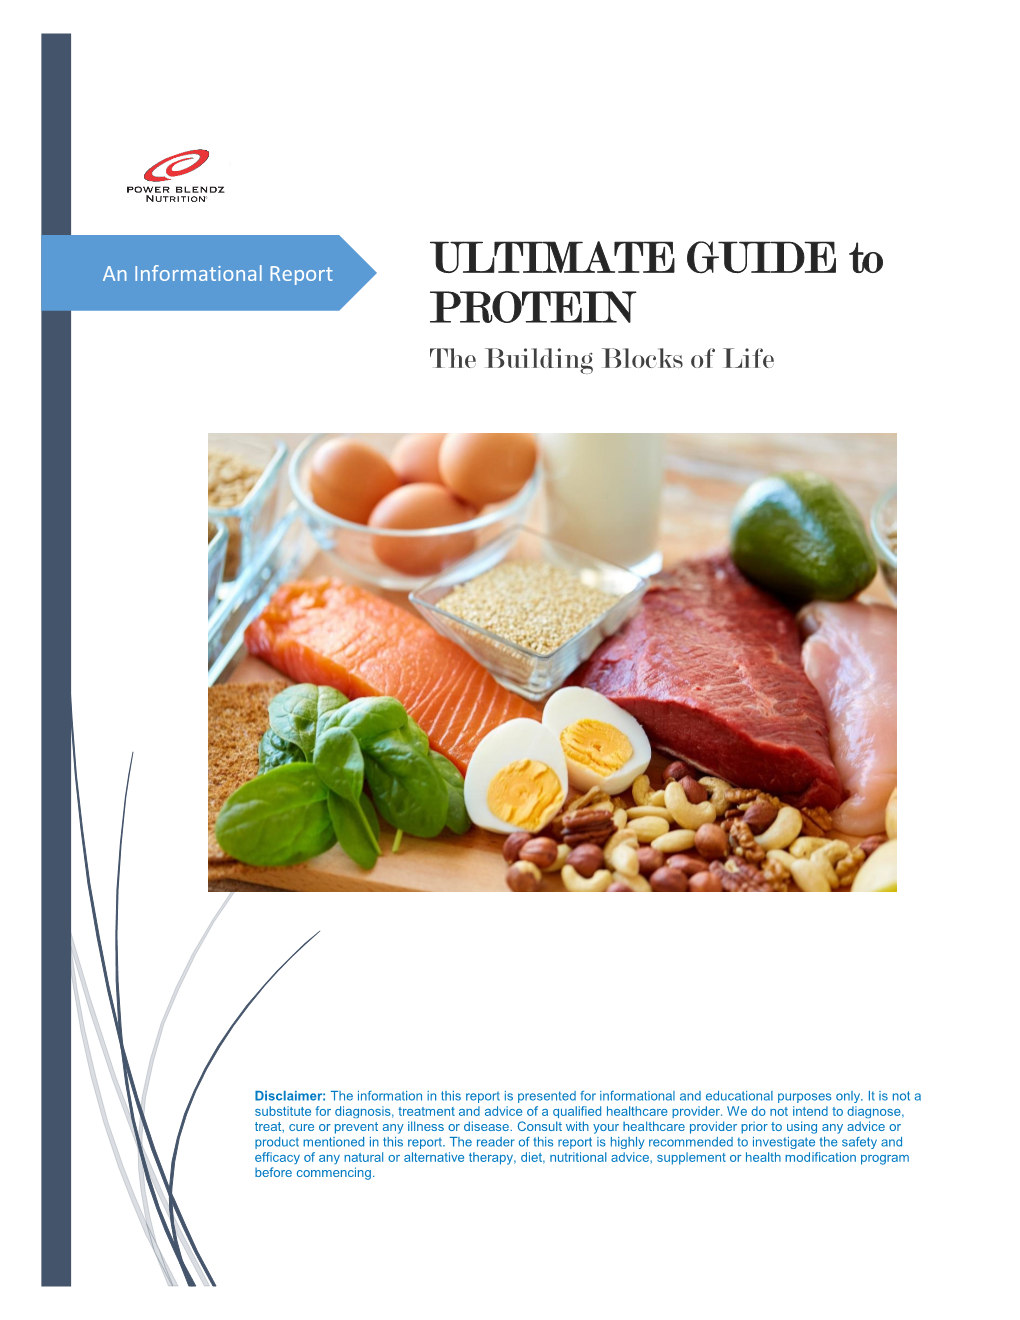 ULTIMATE GUIDE to PROTEIN